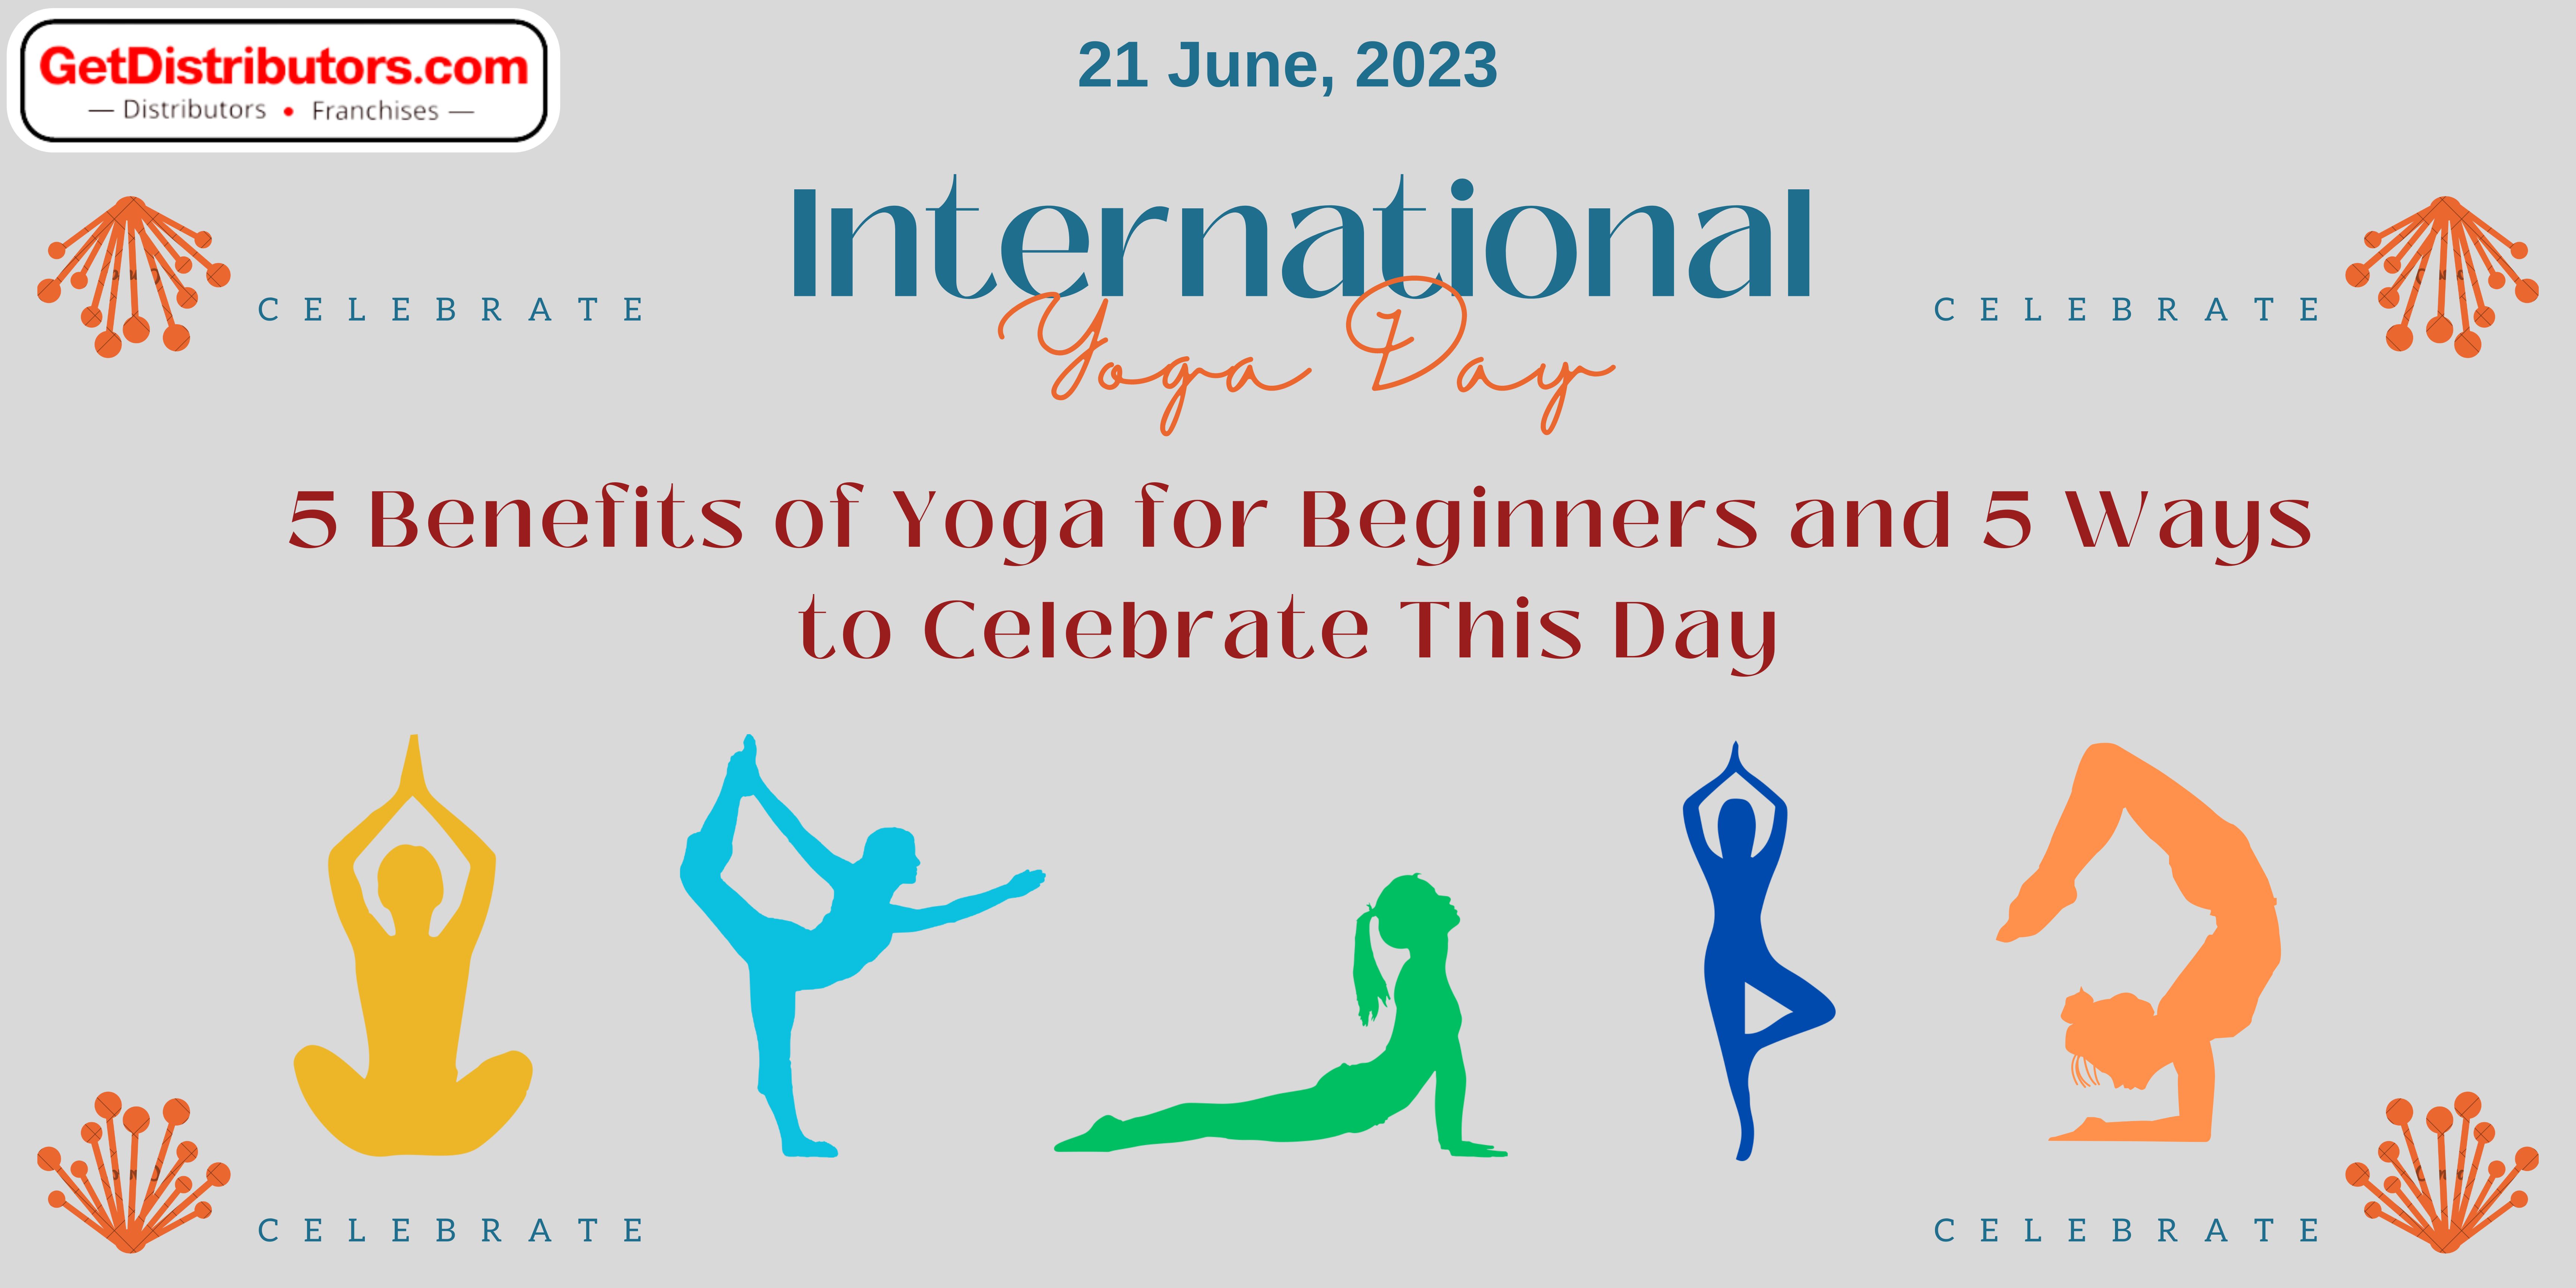 International Yoga Day: 5 Benefits of Yoga for Beginners and 5 Ways to Celebrate This Day